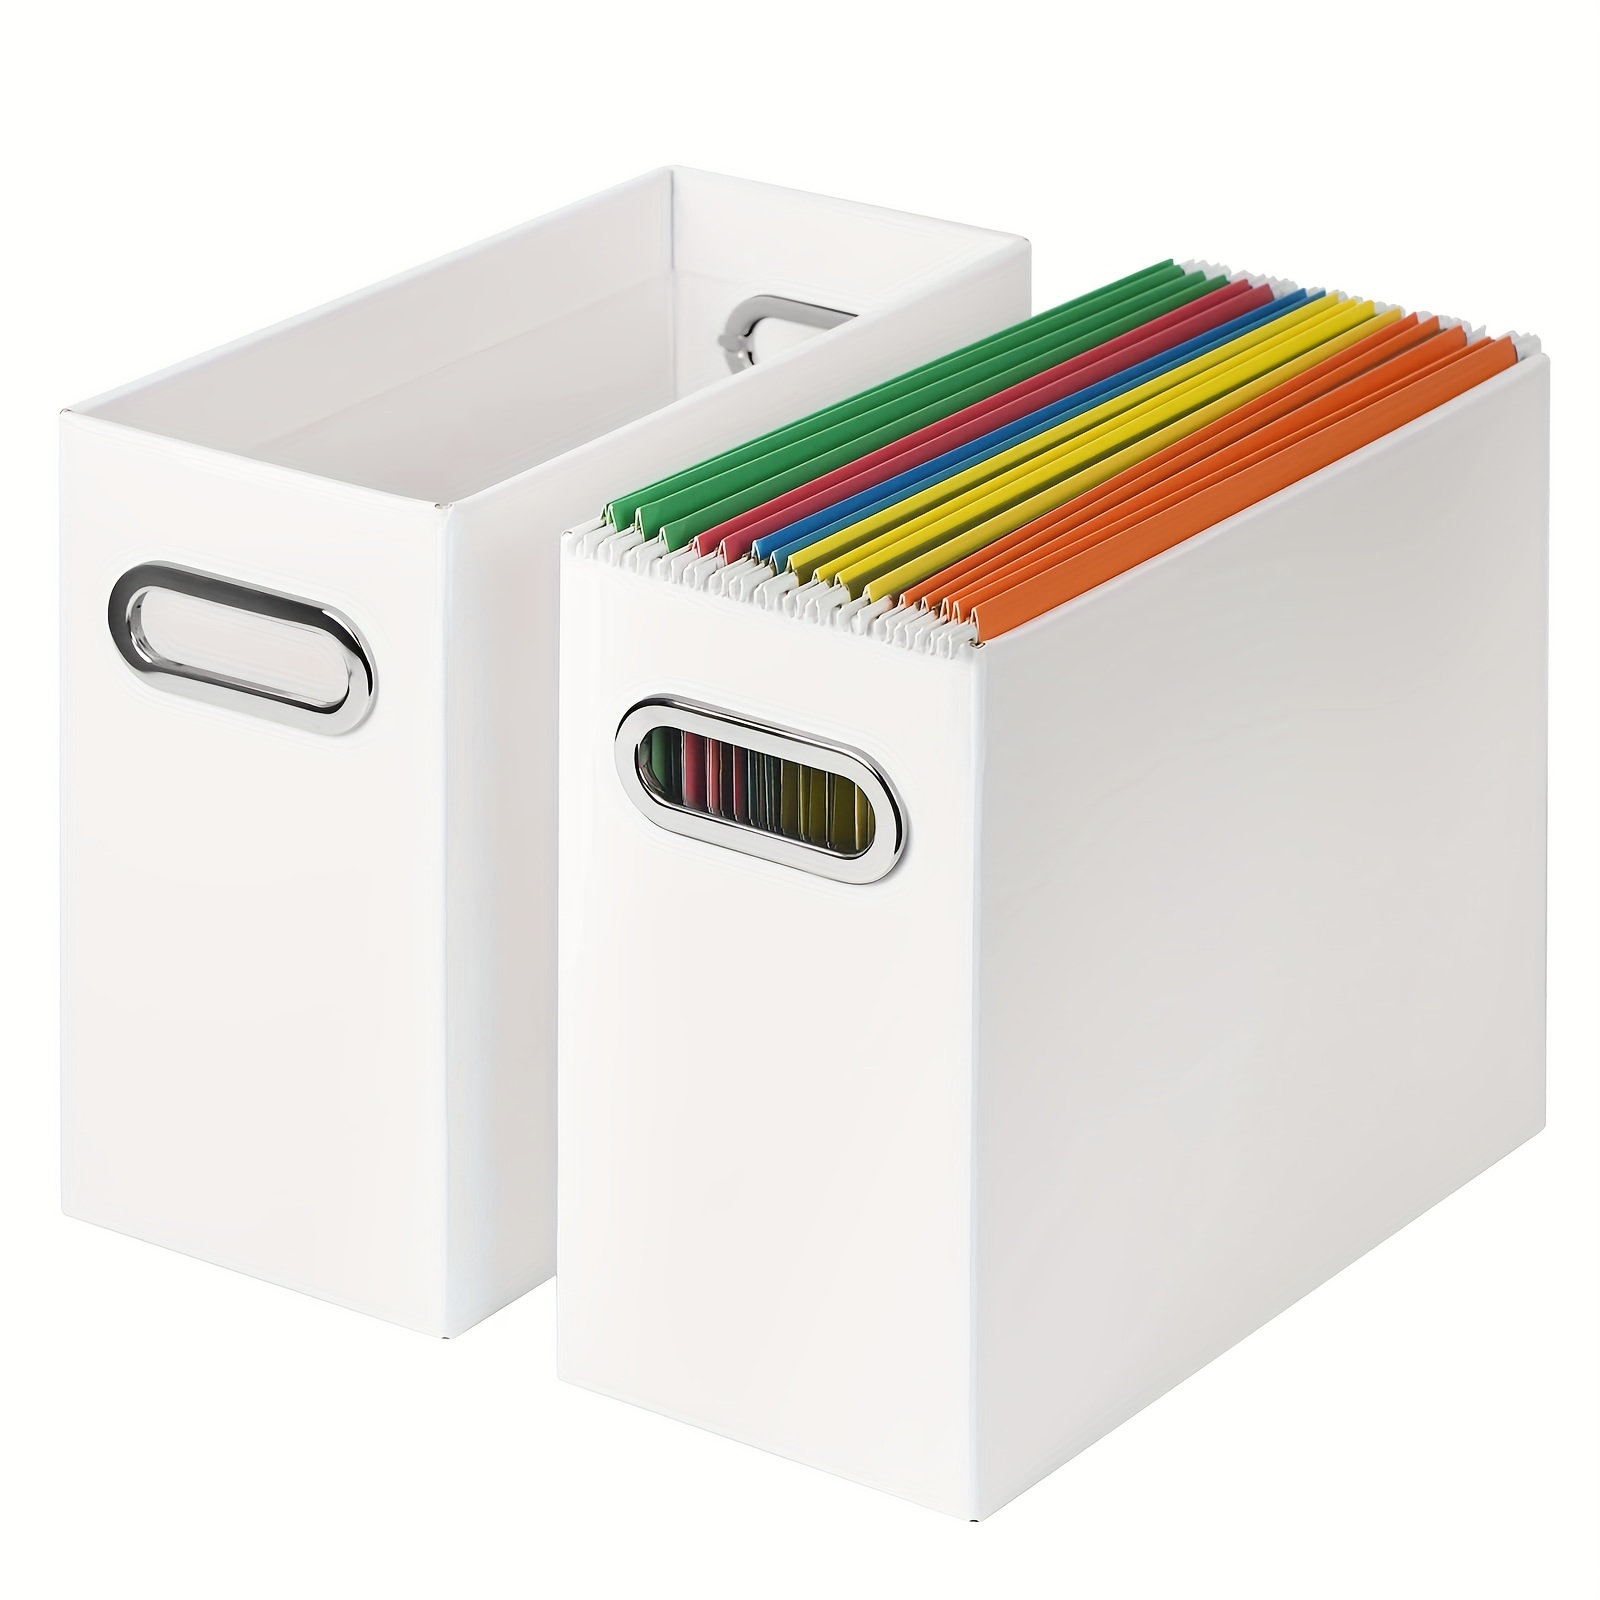 2-layer File Box Bag, Large Capacity Organizer With 5 Tab Inserts